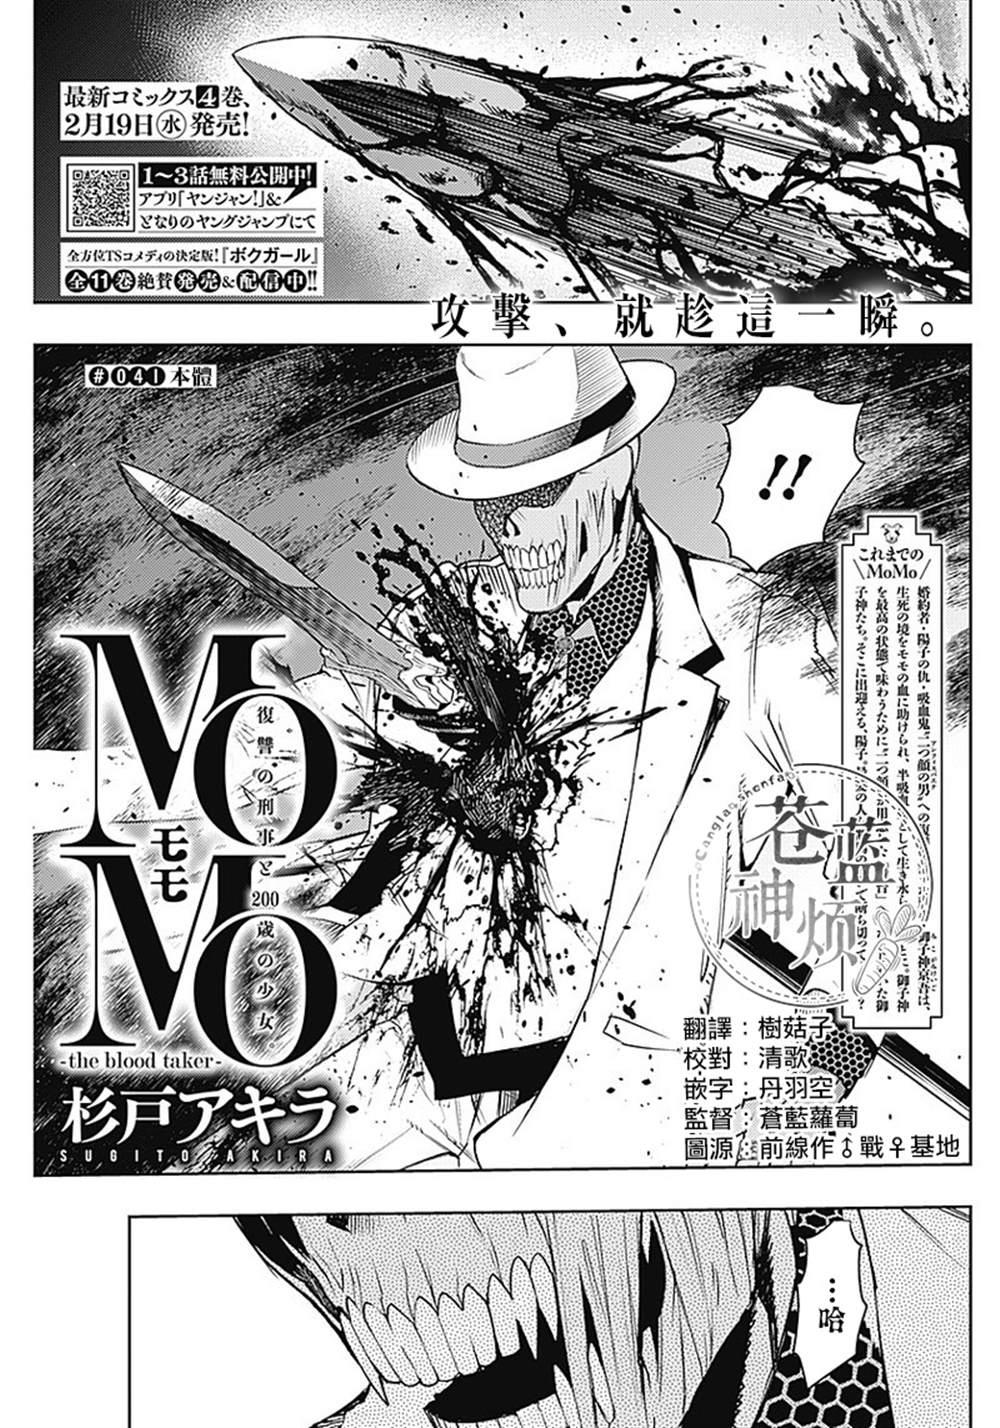 MoMo-the blood taker - 第41話 - 1